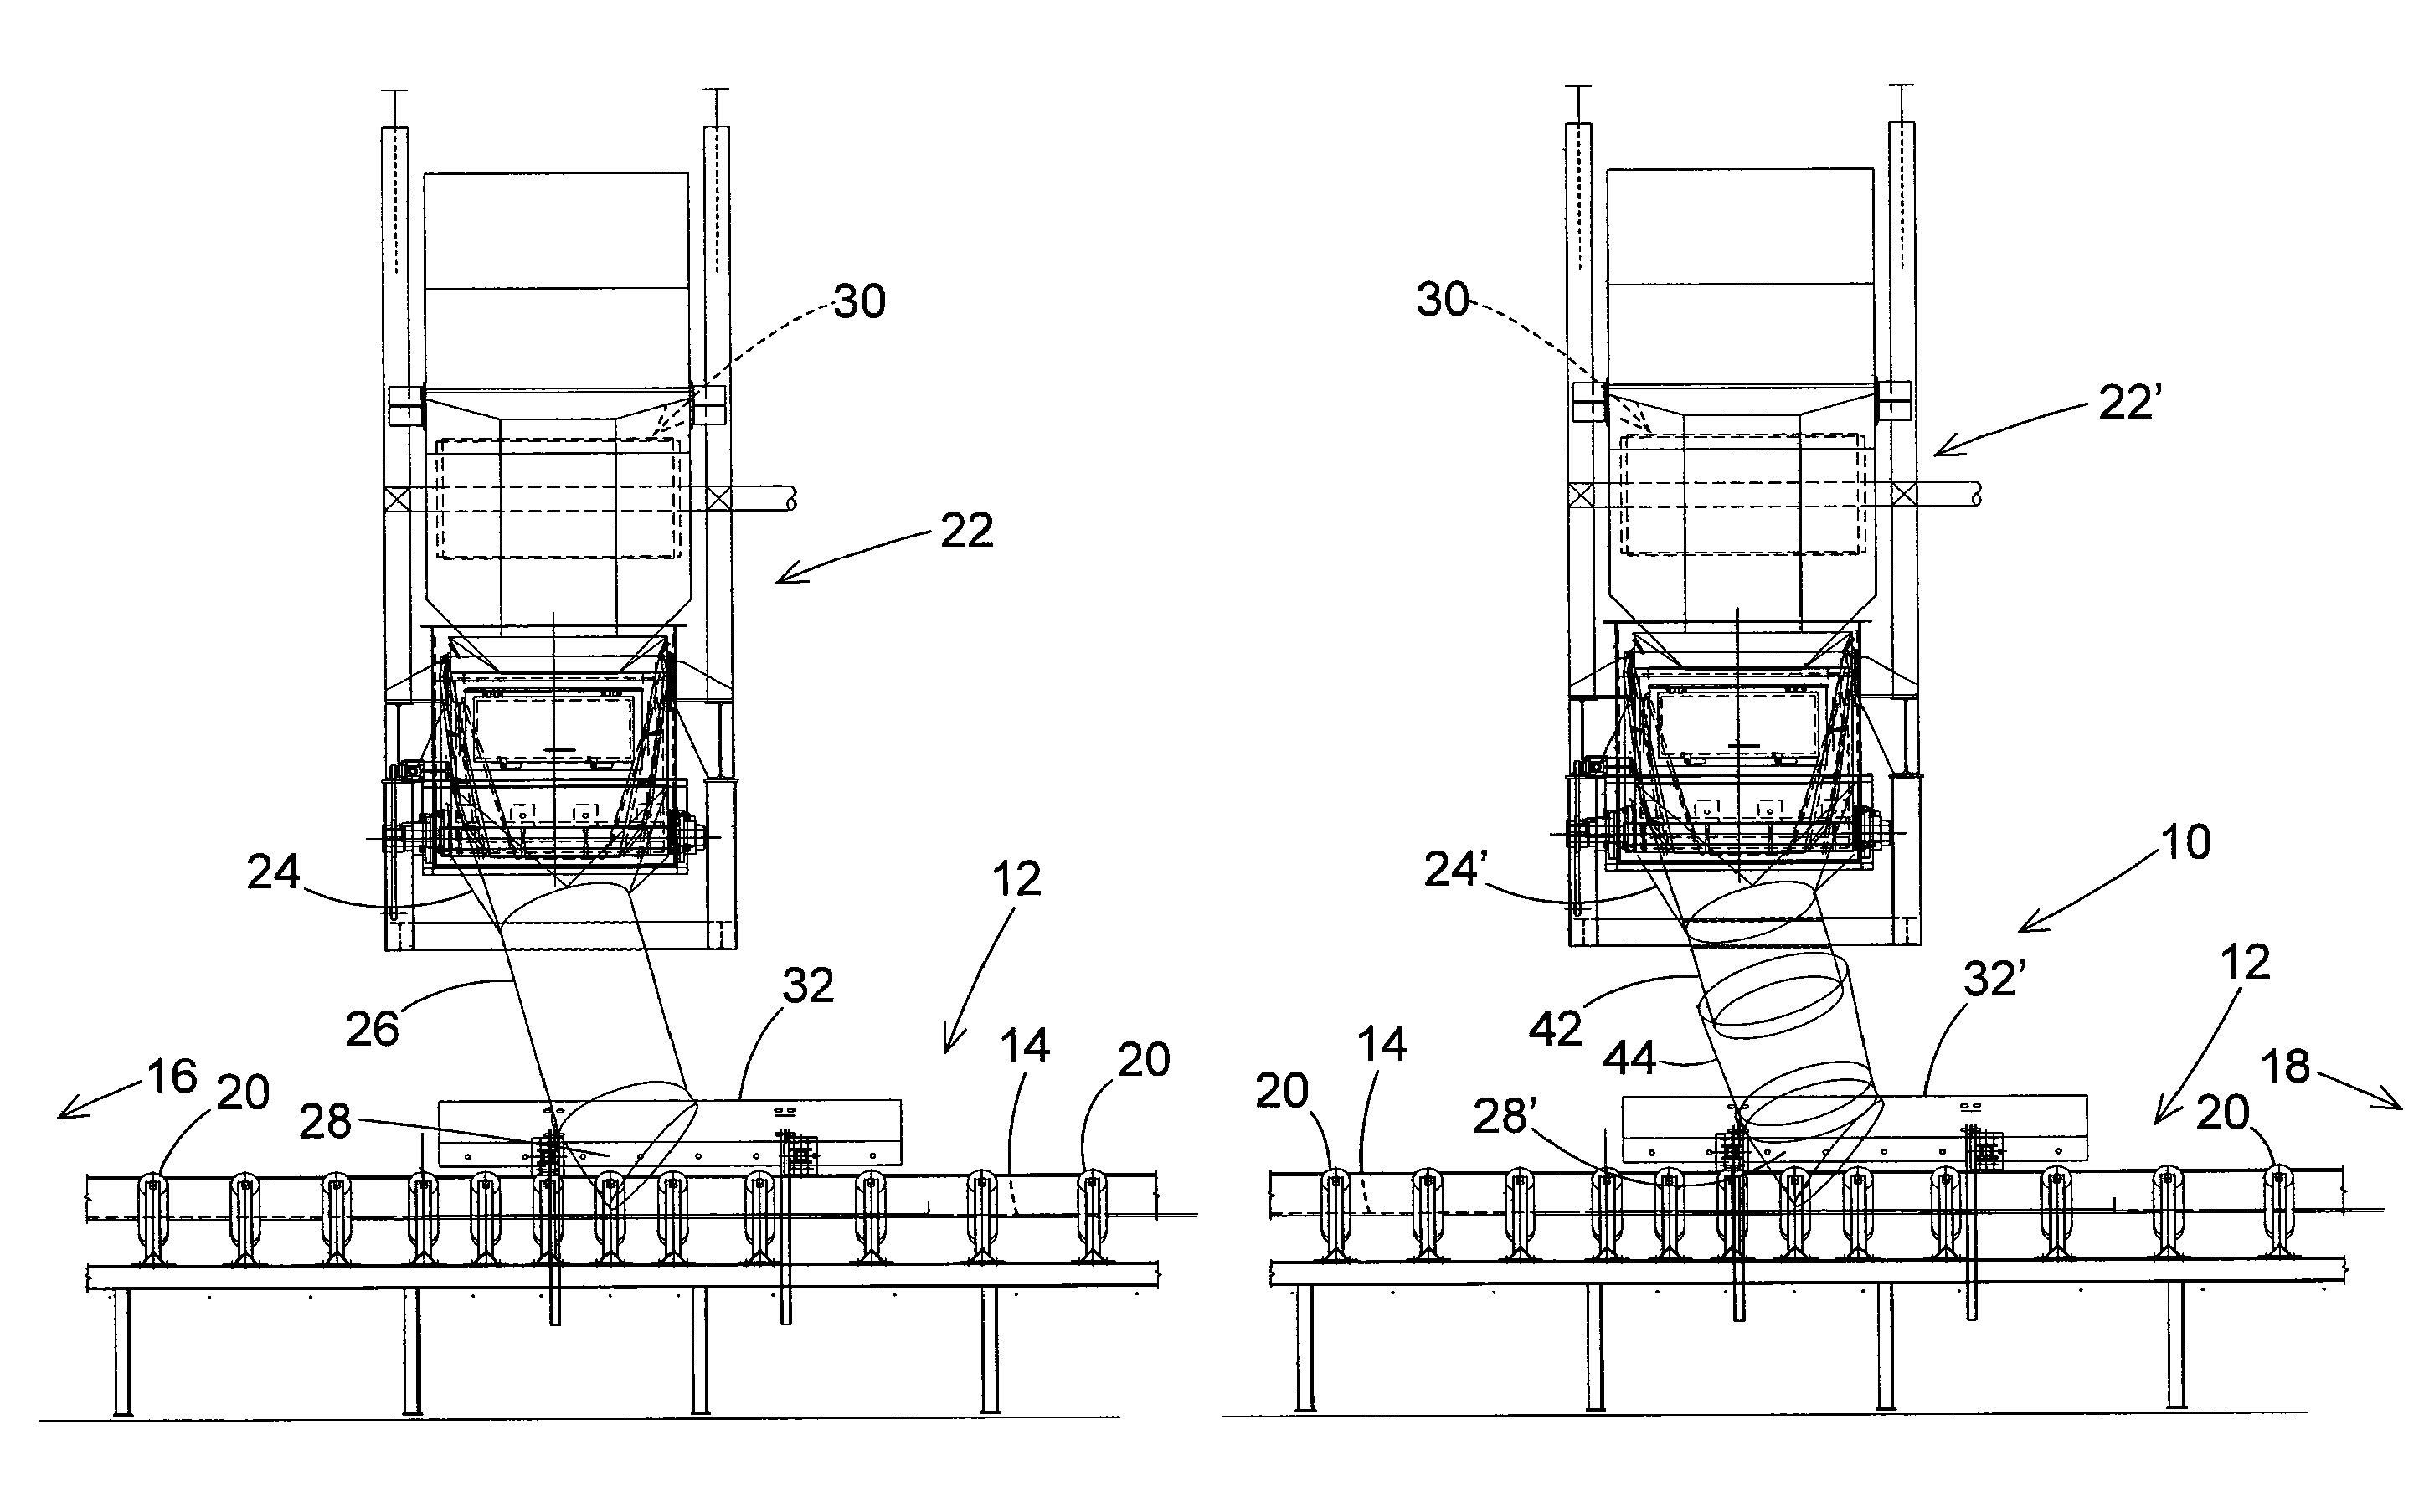 Retractable and extendable material loader apparatus for directing material onto a conveyor